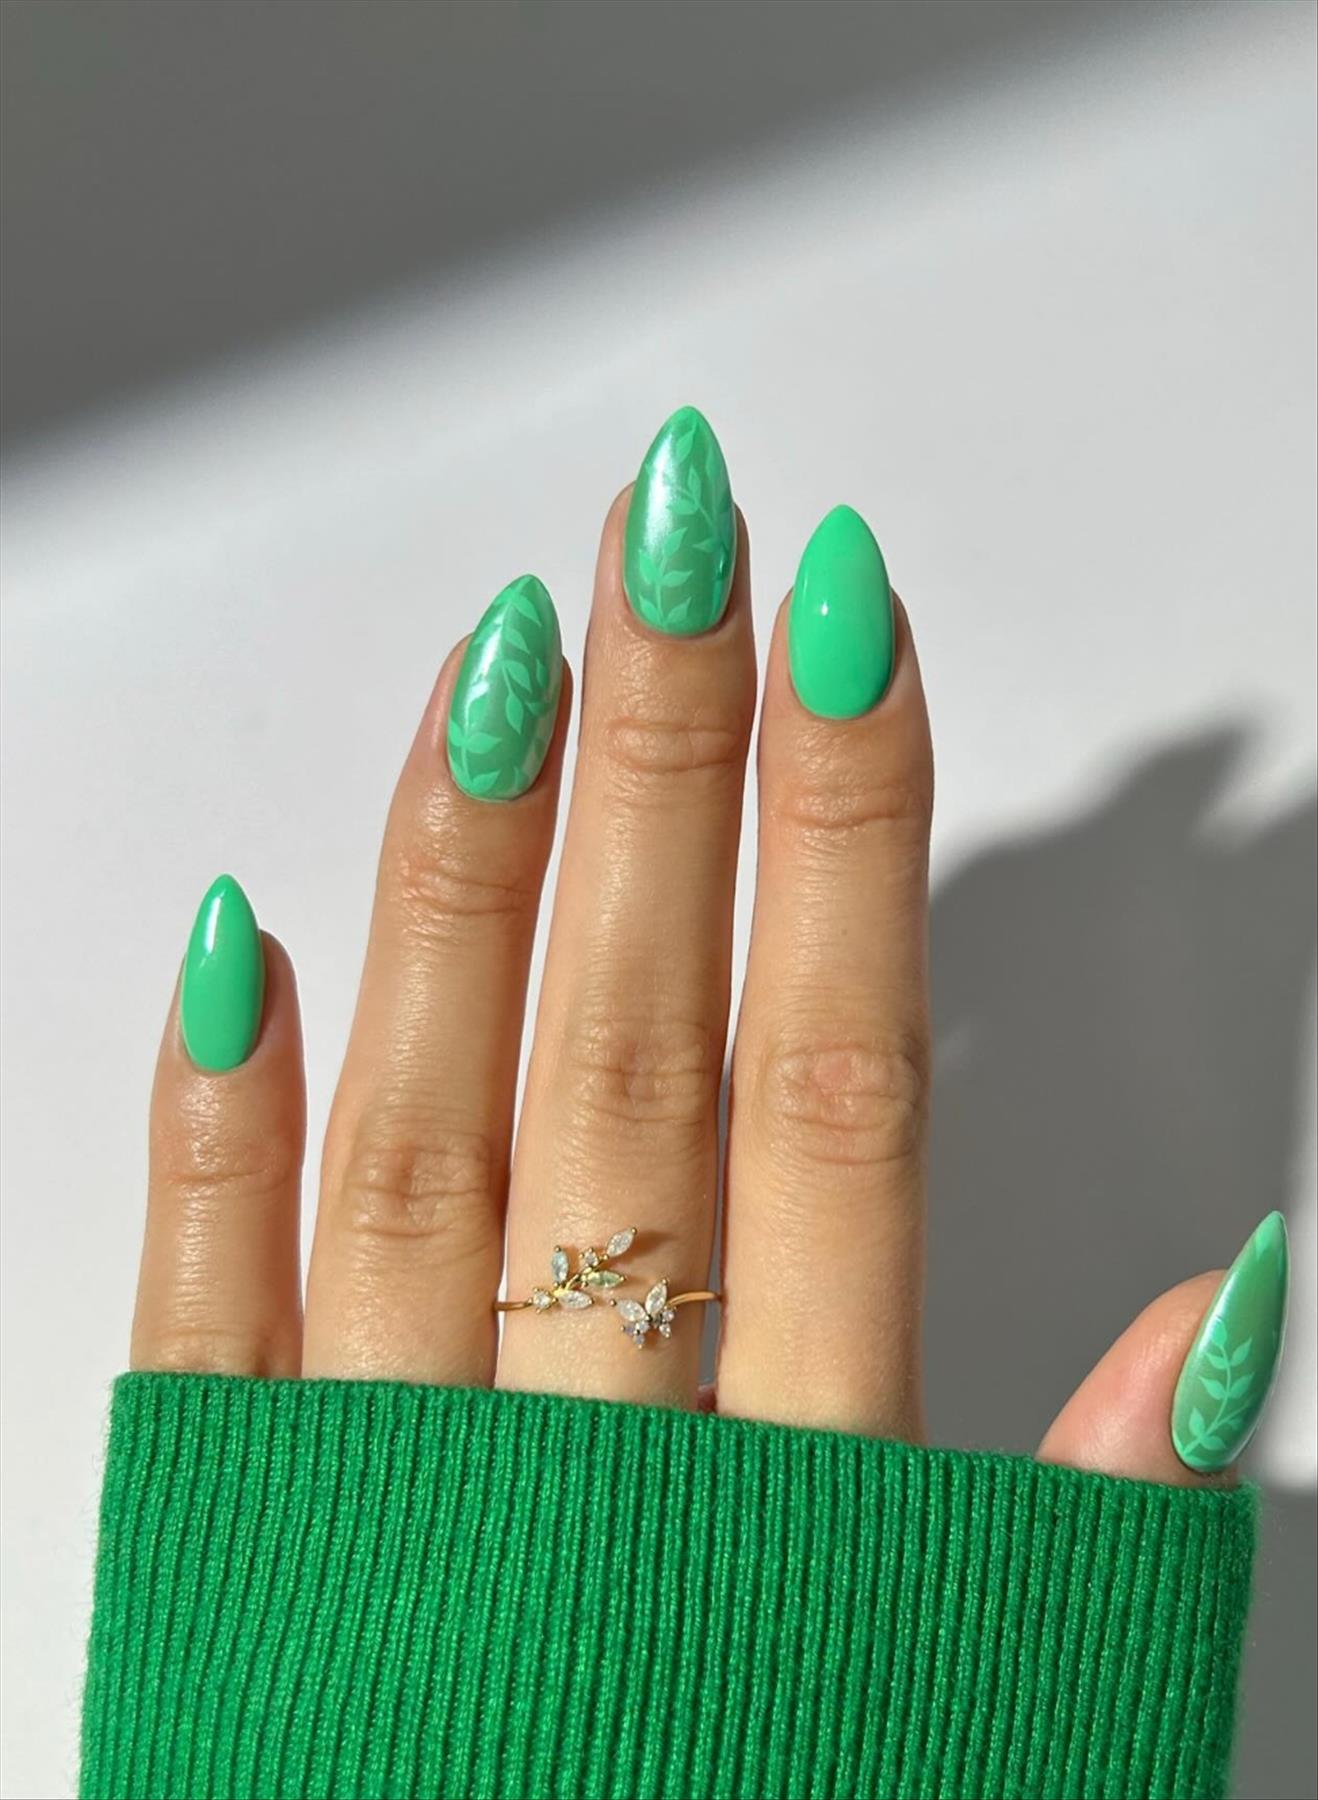 Fresh Short Almond Nails for a Stylish Summer Look